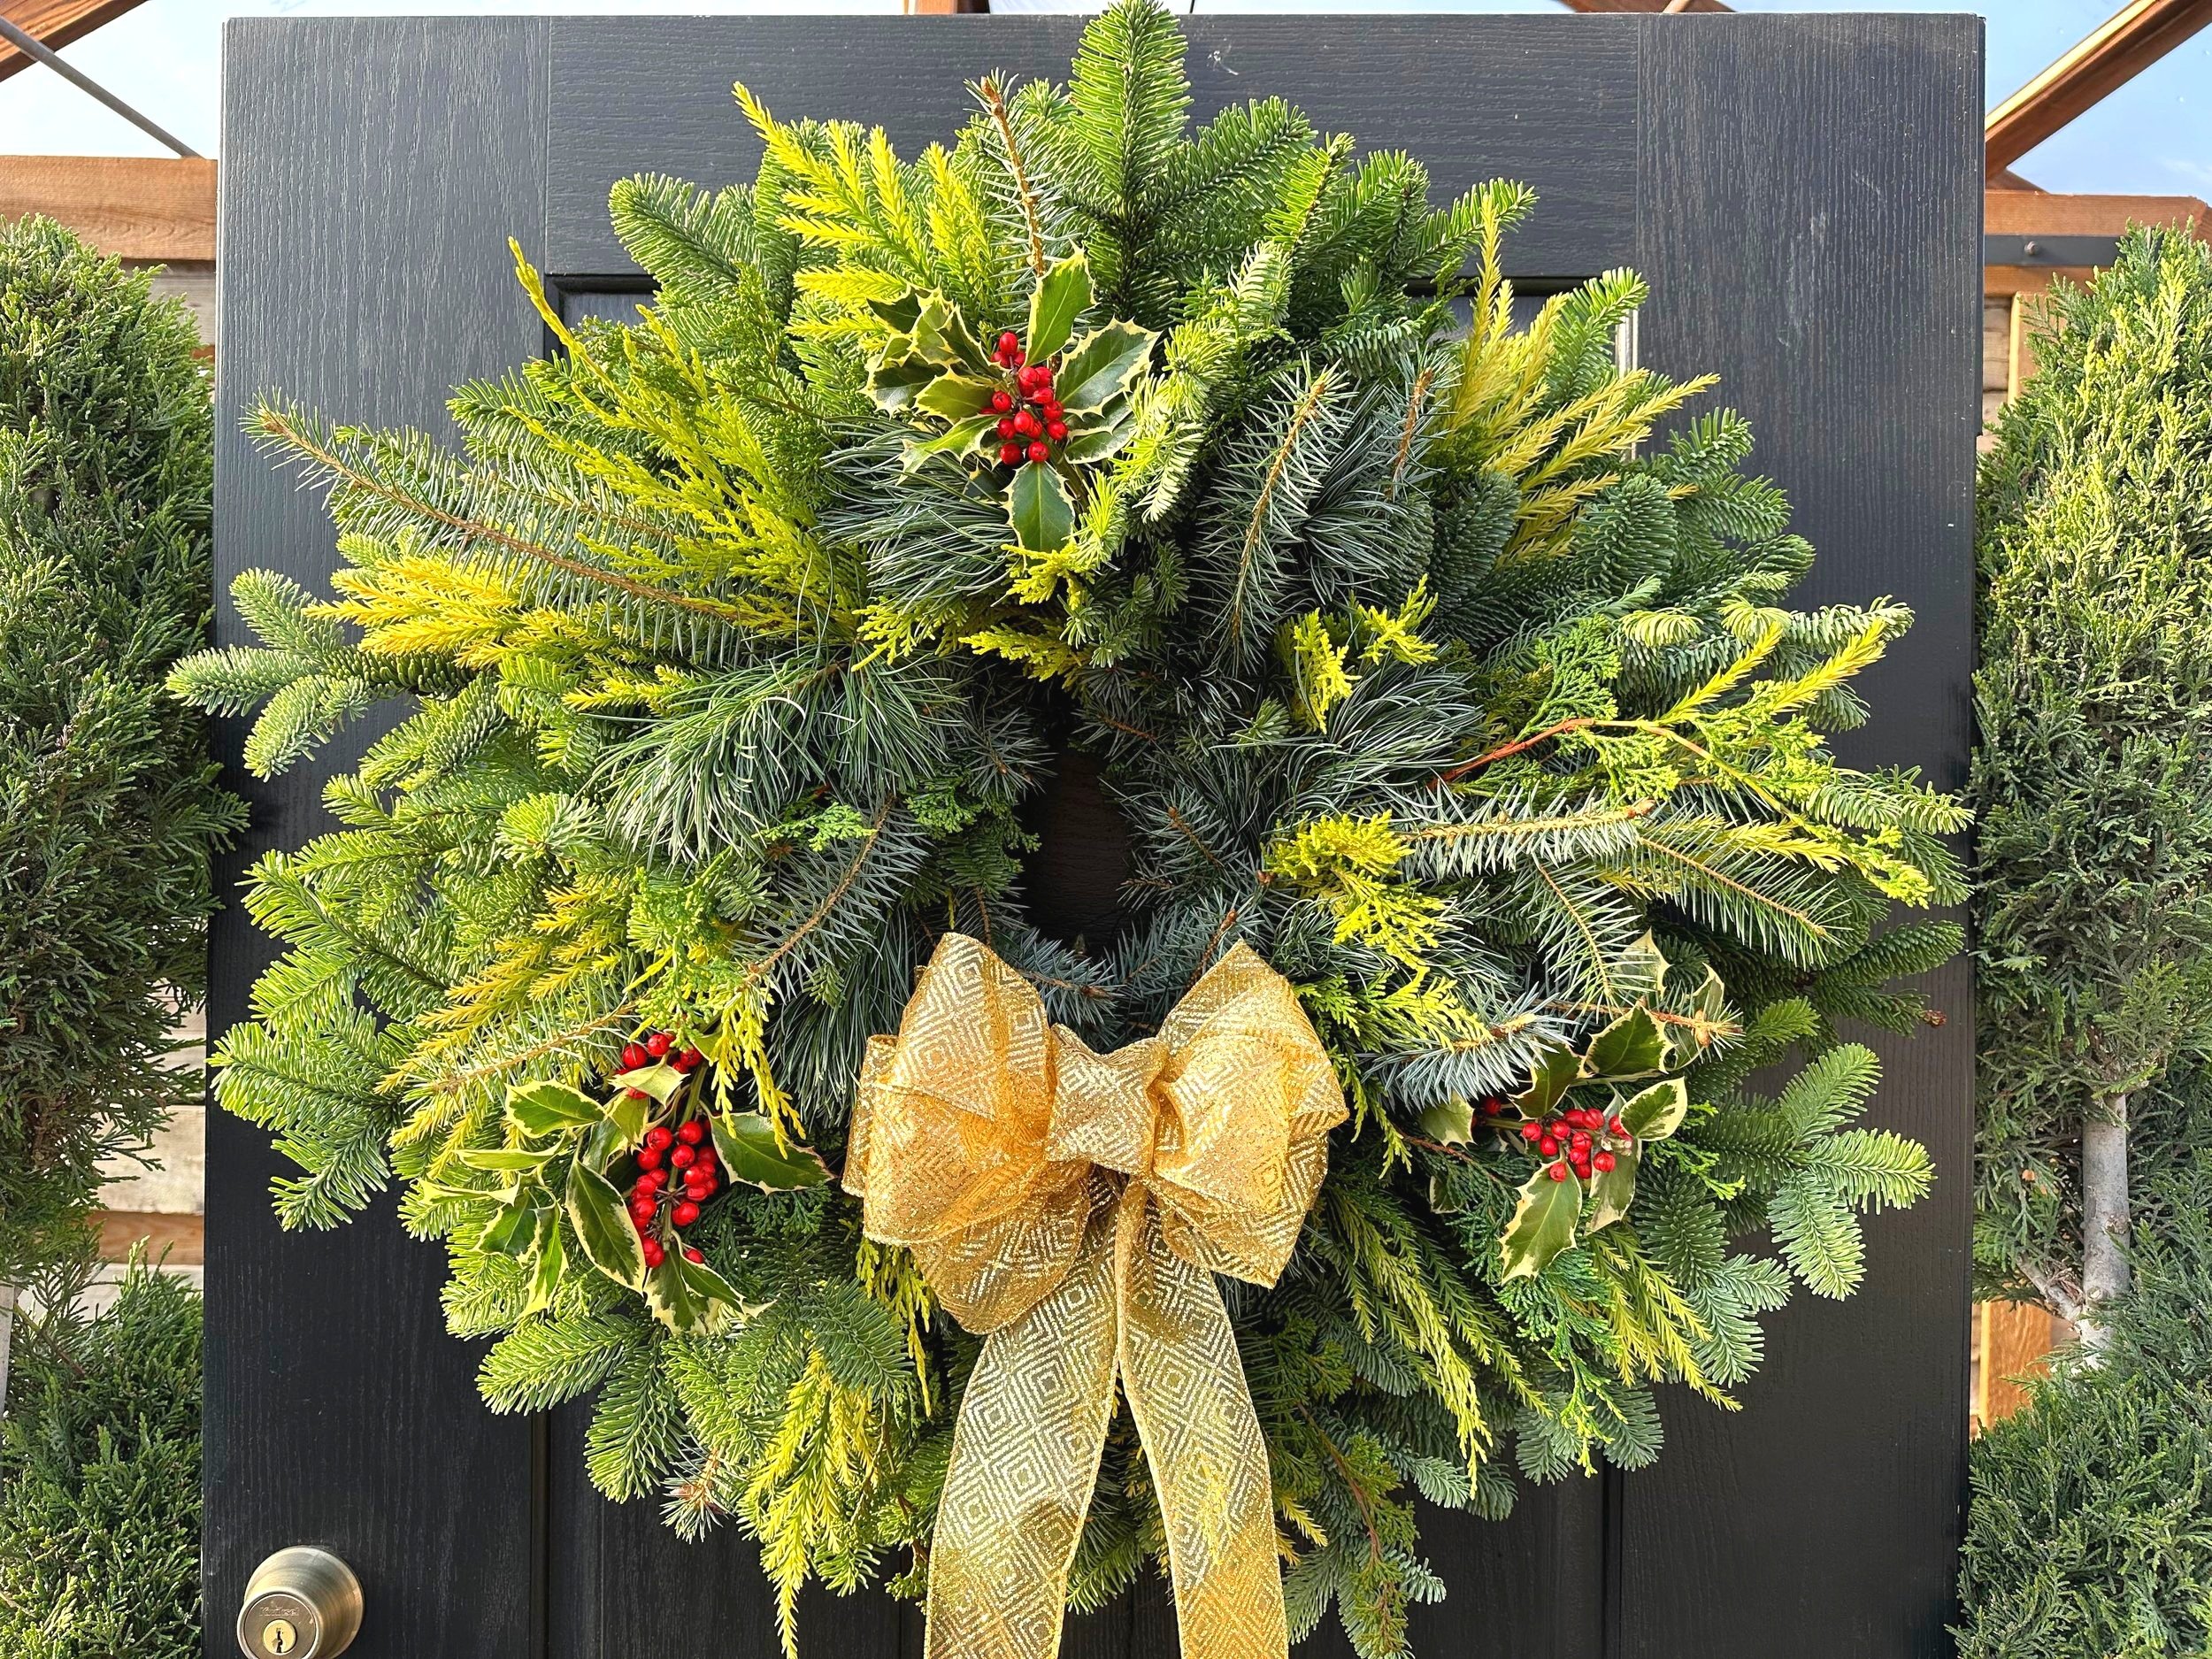 Wreath+%234+with+variegated+holly+%26+gold+bow.jpg